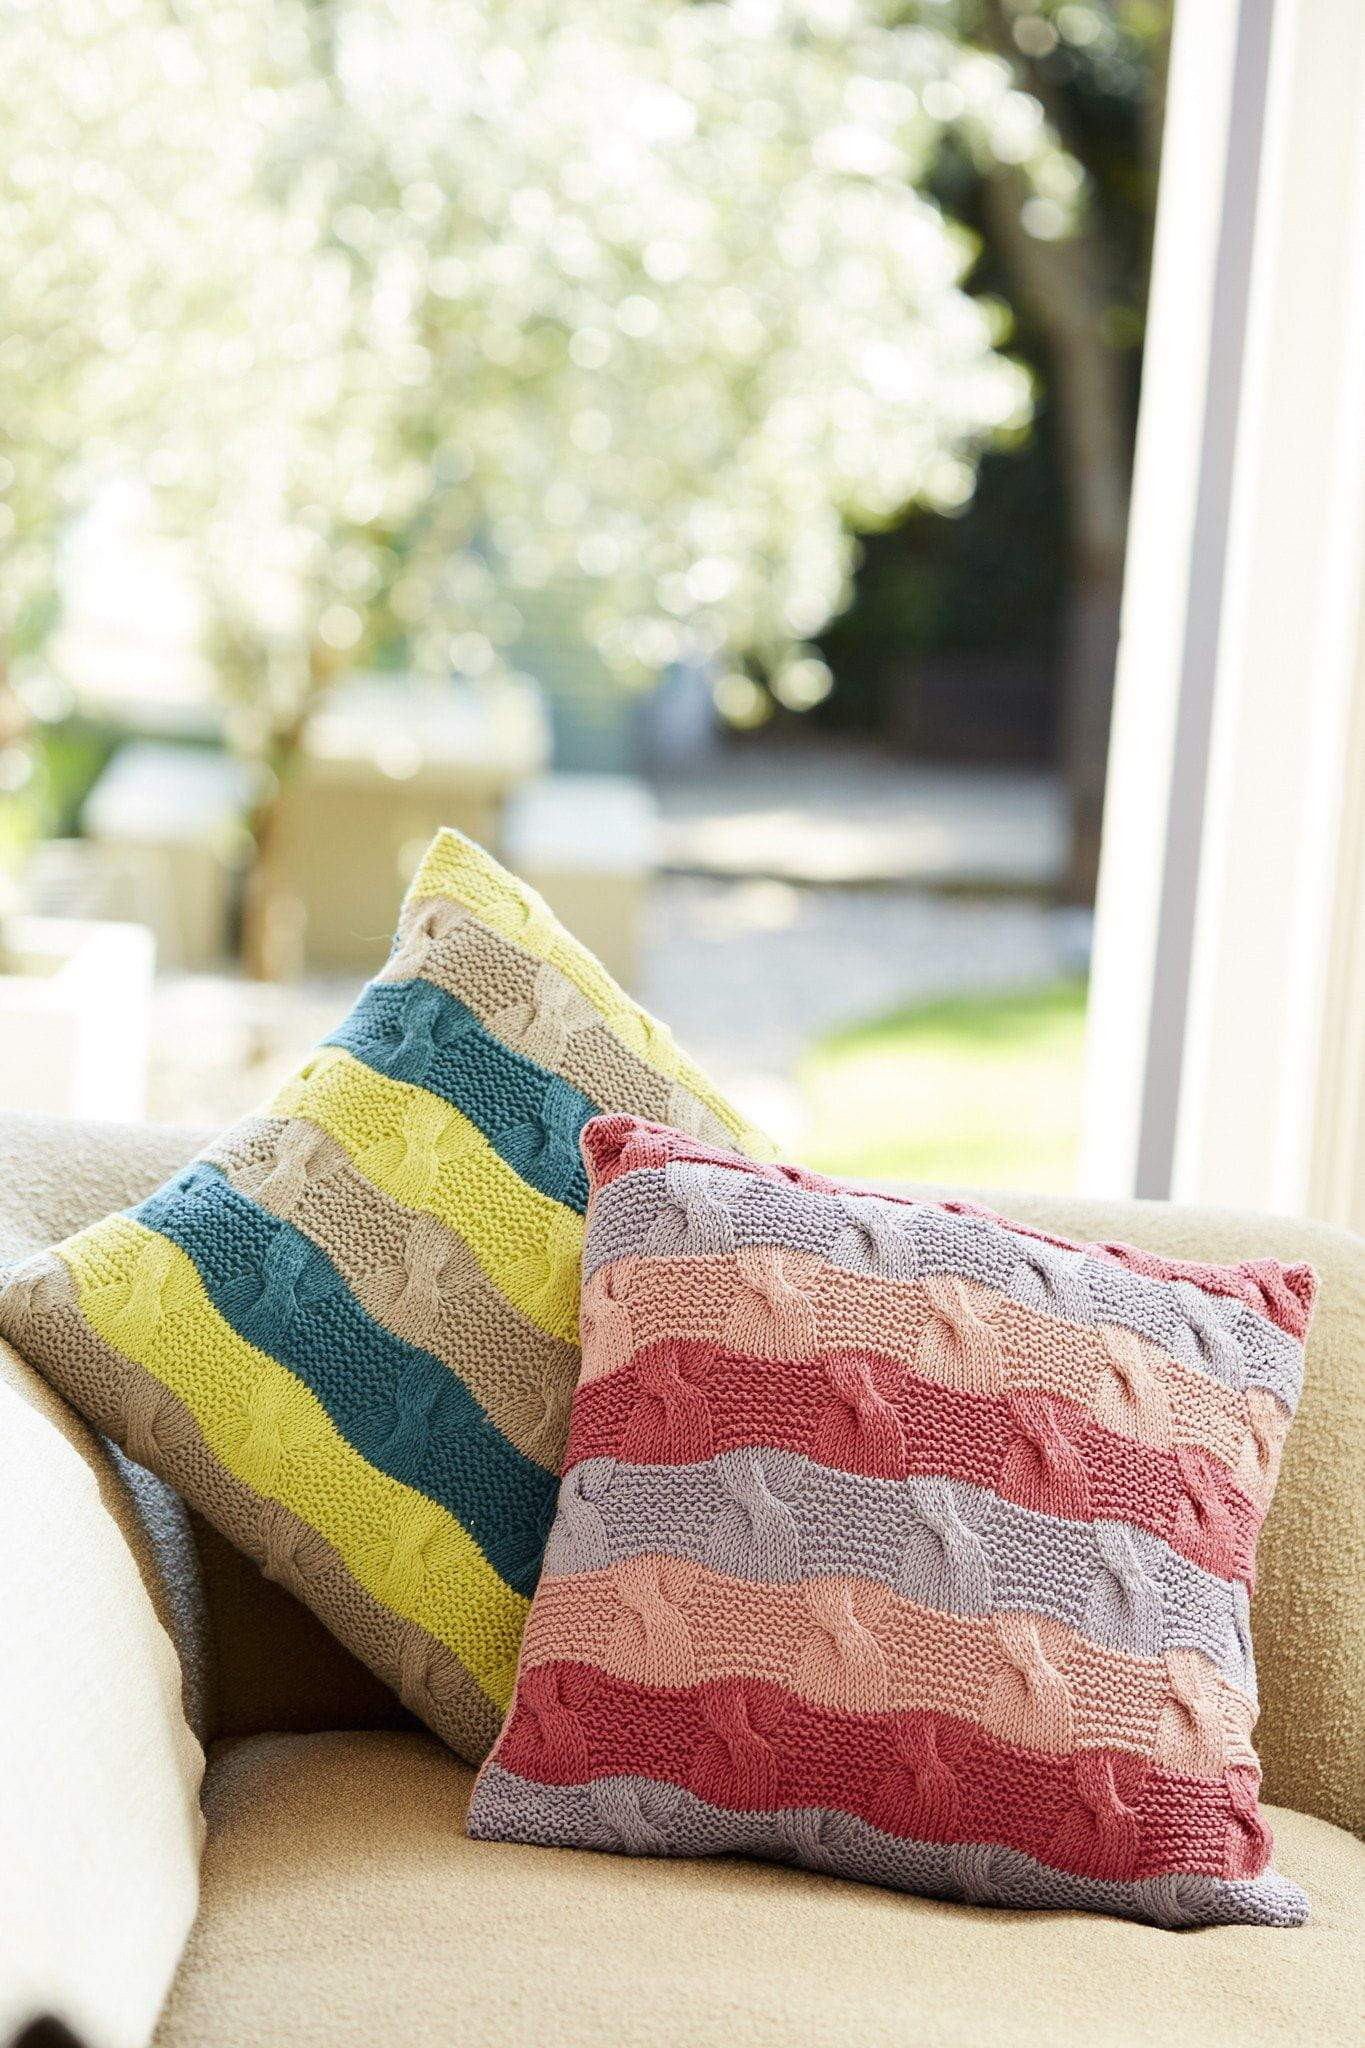 Knitting Pattern For Cushion Cover With Cables Striped Cushions Knitting Patterns